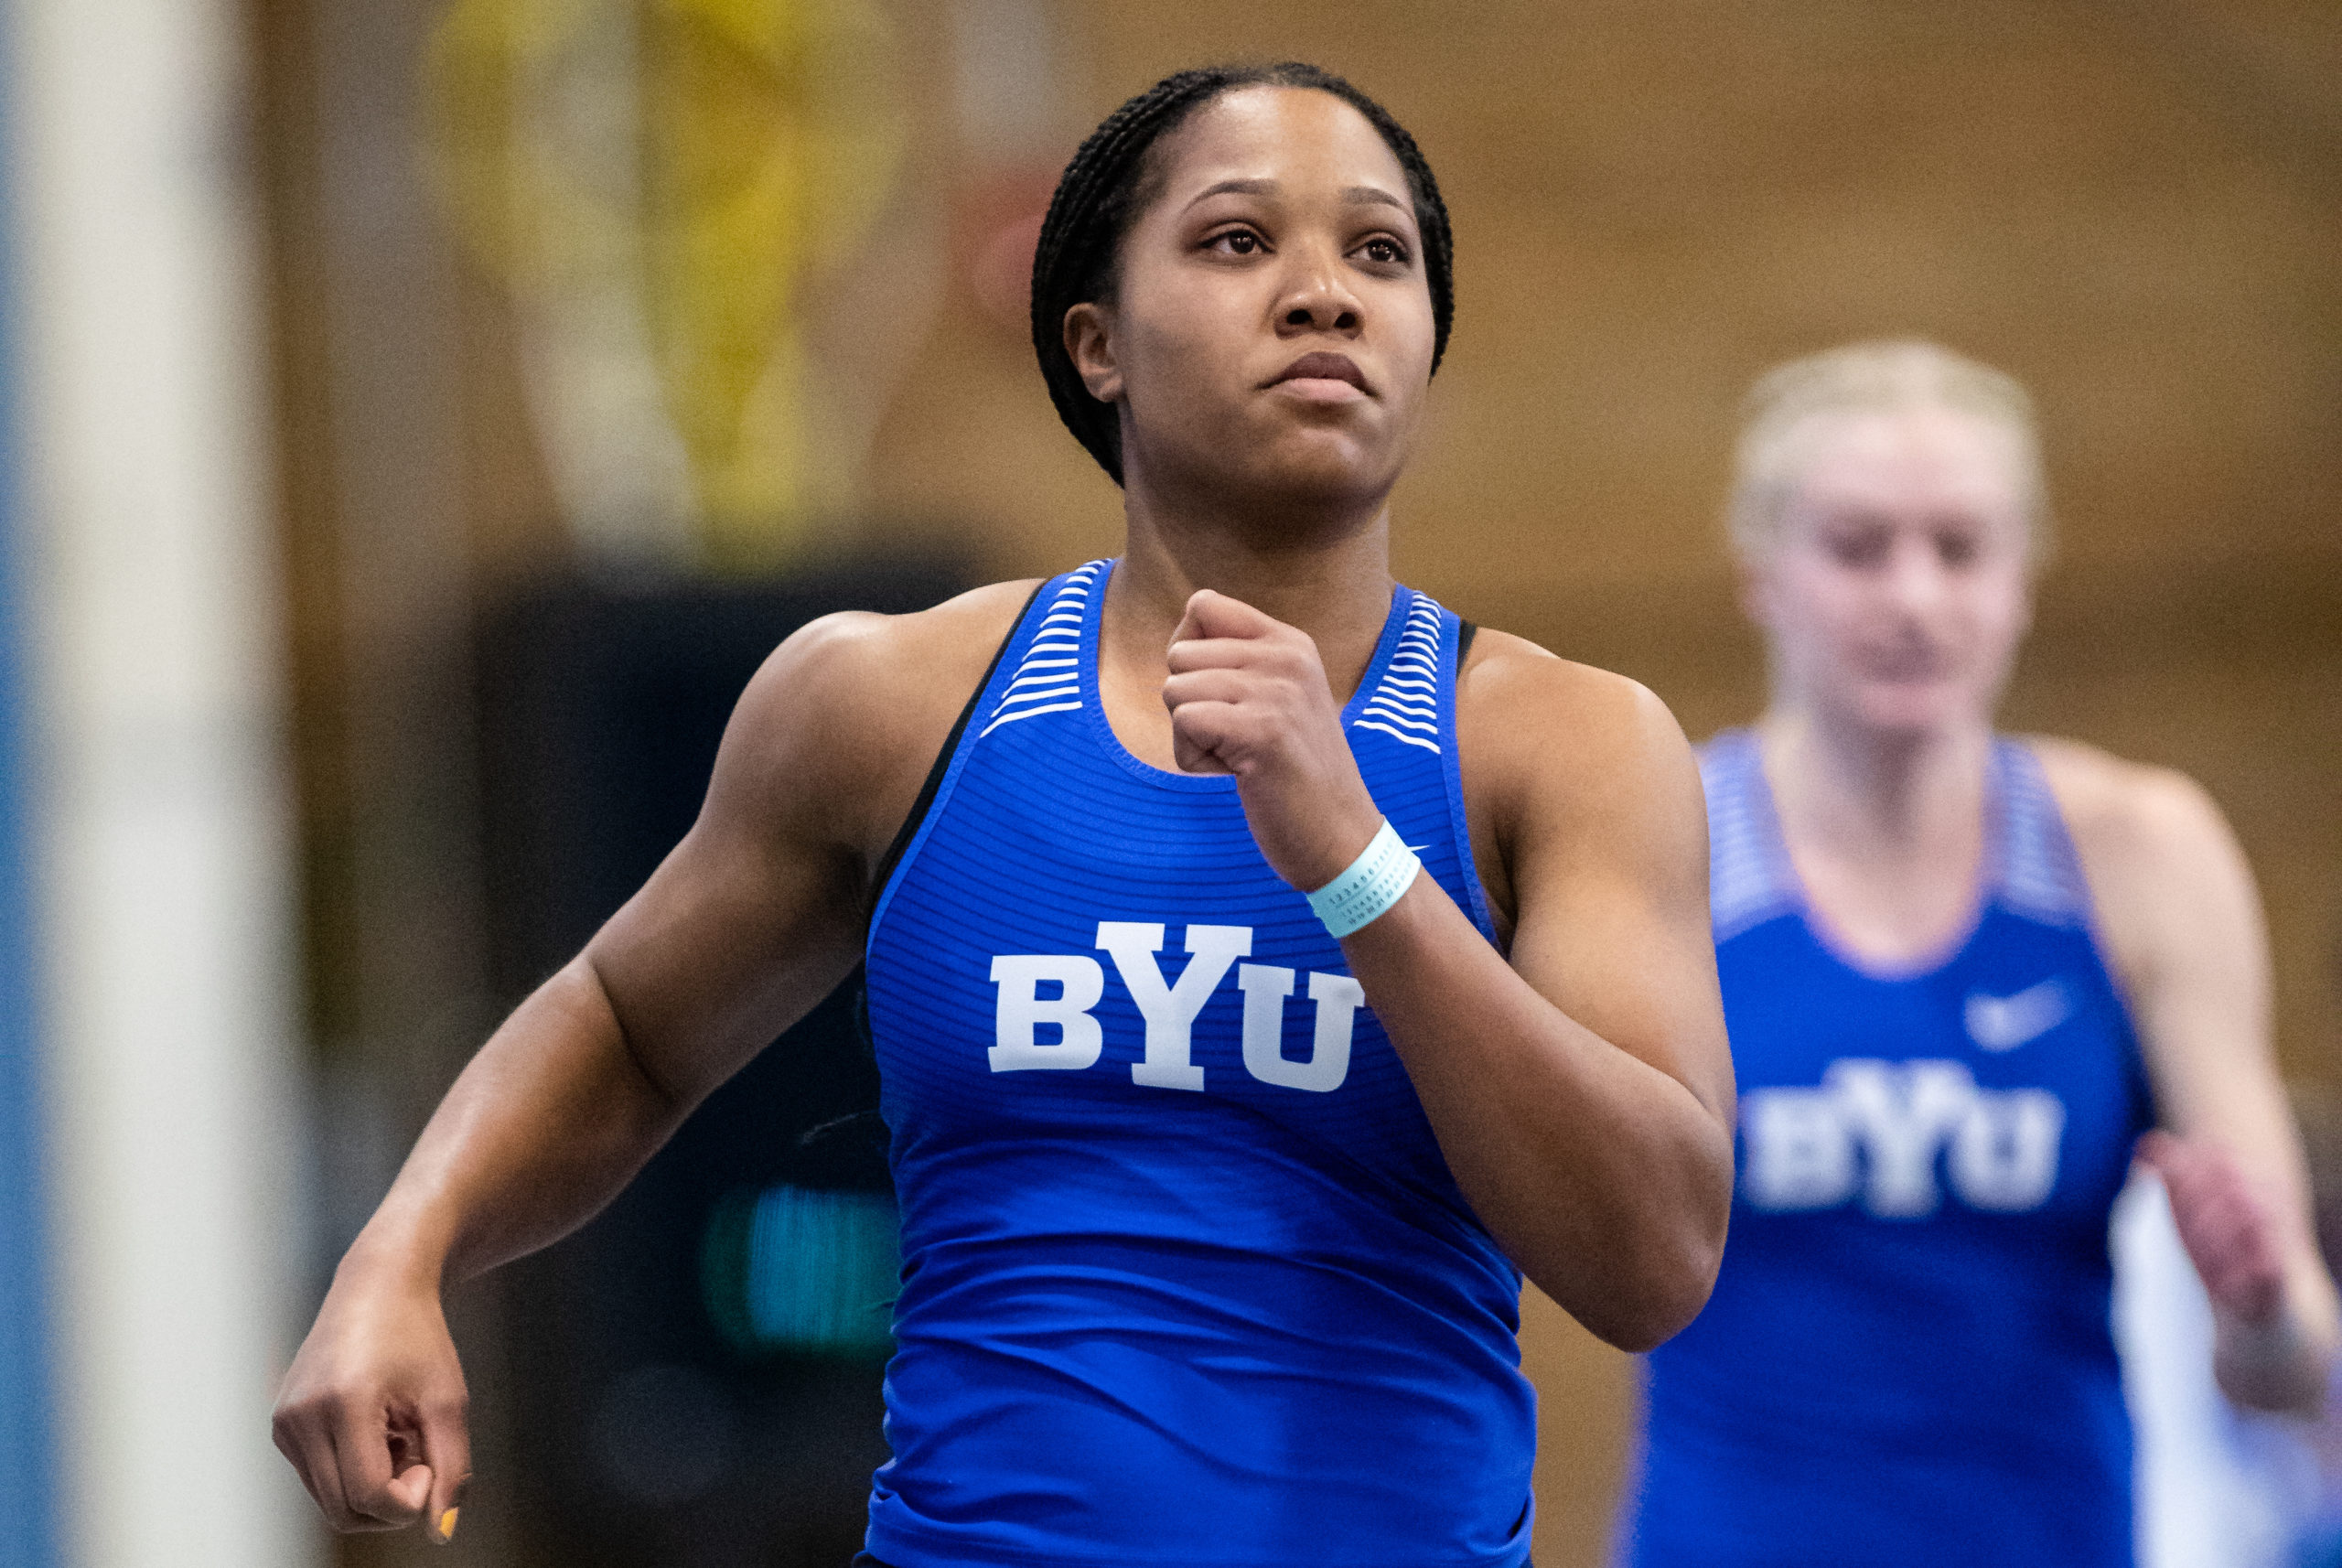 Recordbreaking Gardner looks to do it again for the BYU track team